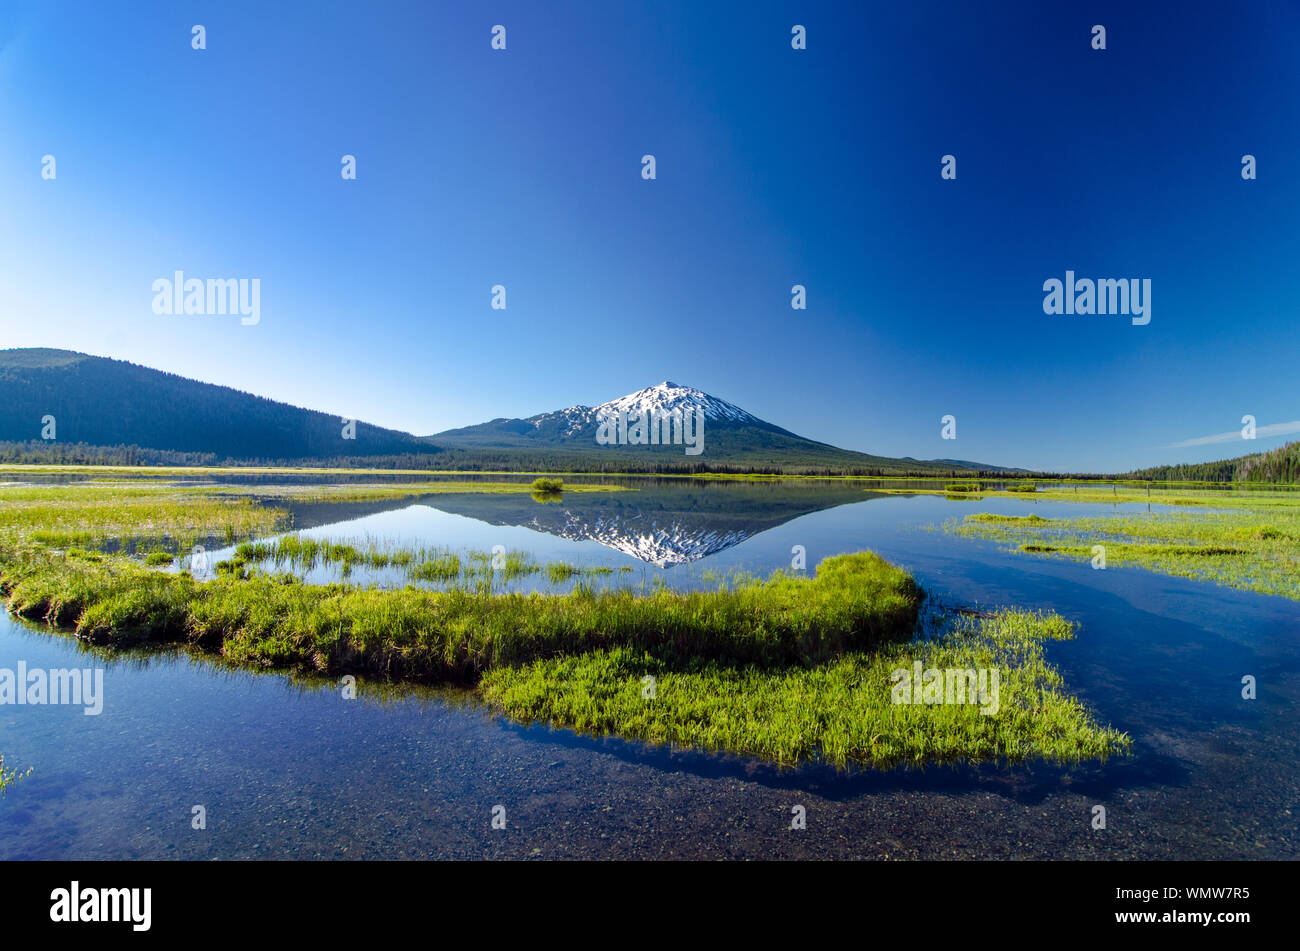 Scenic View Of Mt Bachelor And Sparks Lake Against Clear Blue Sky Stock Photo